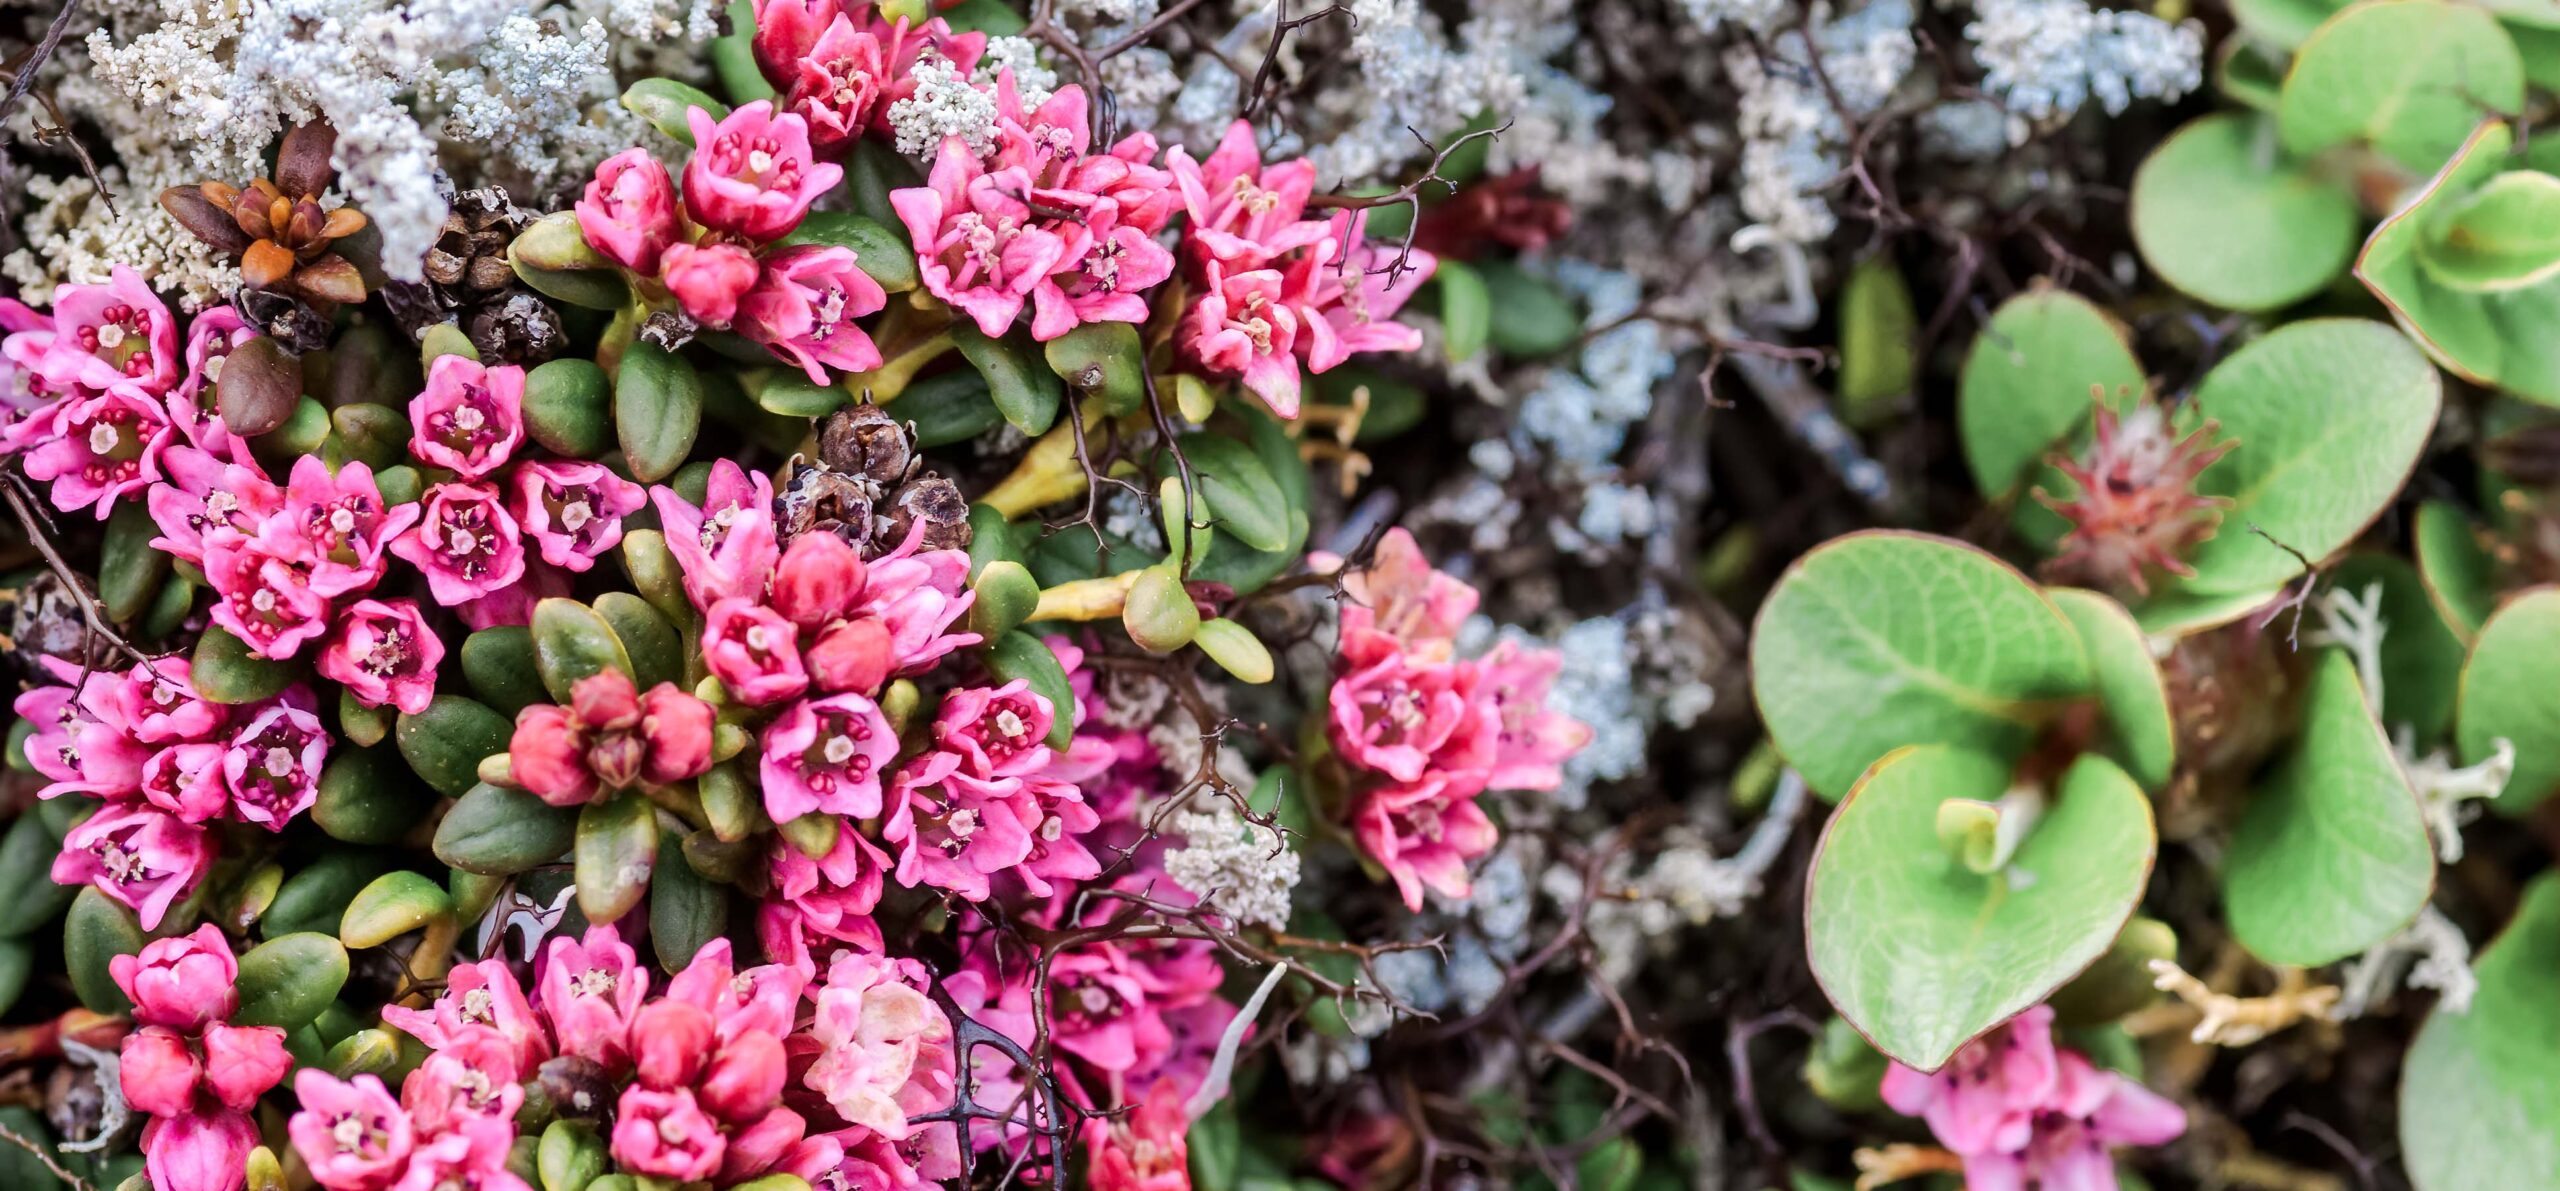 Ground cover with small pink flowers, in Alaska